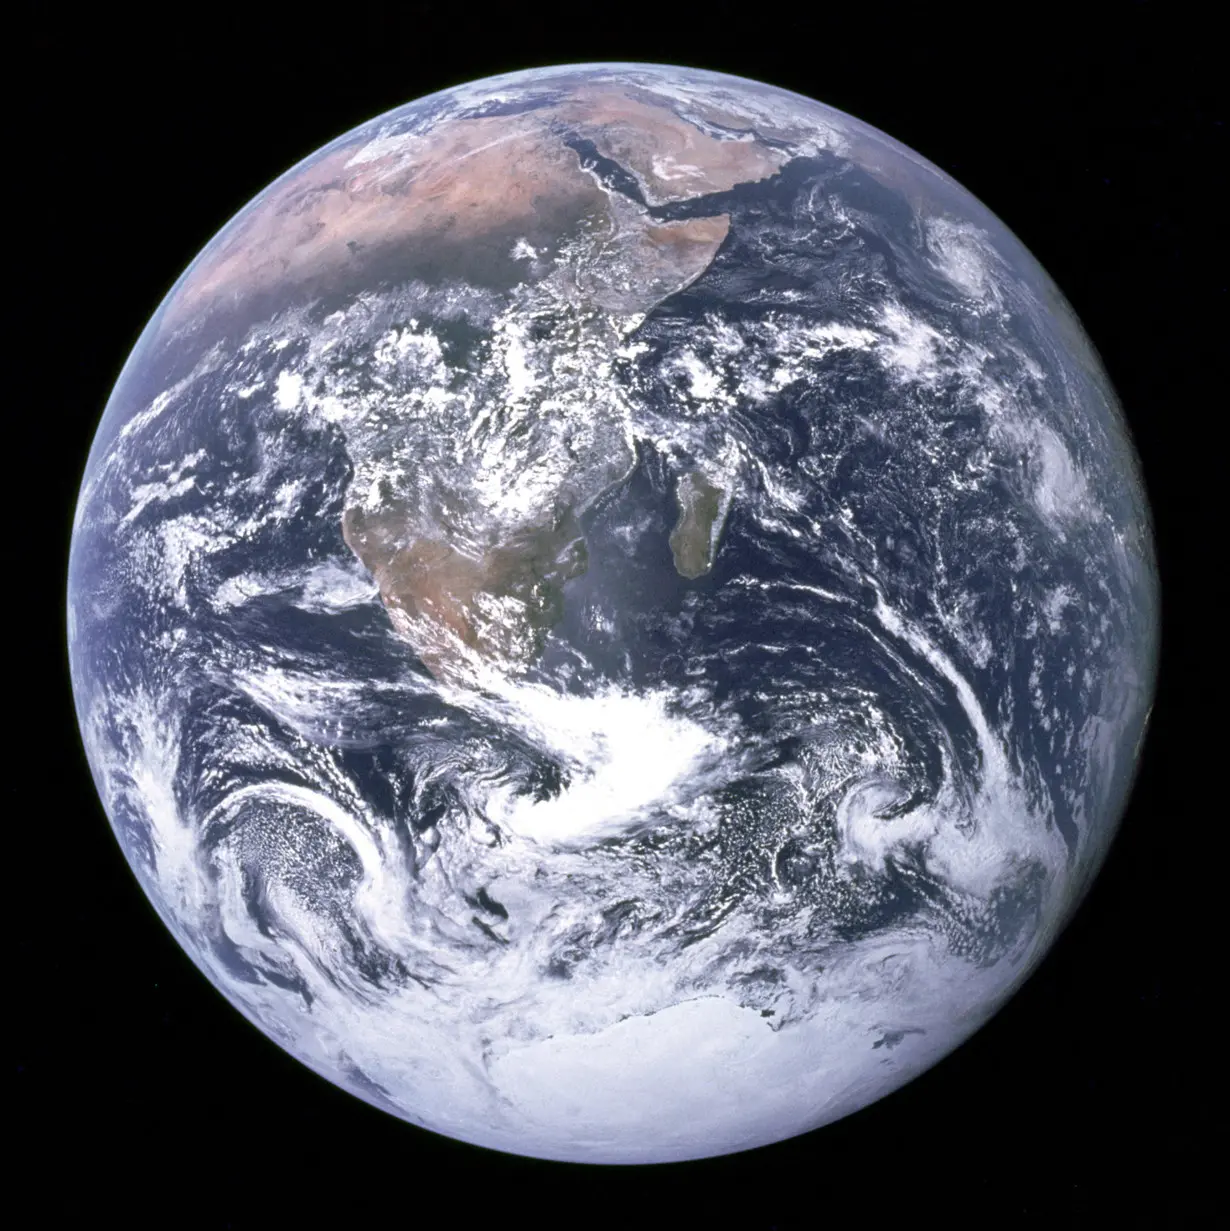 FILE PHOTO: View of the Earth taken by Apollo 17 crew